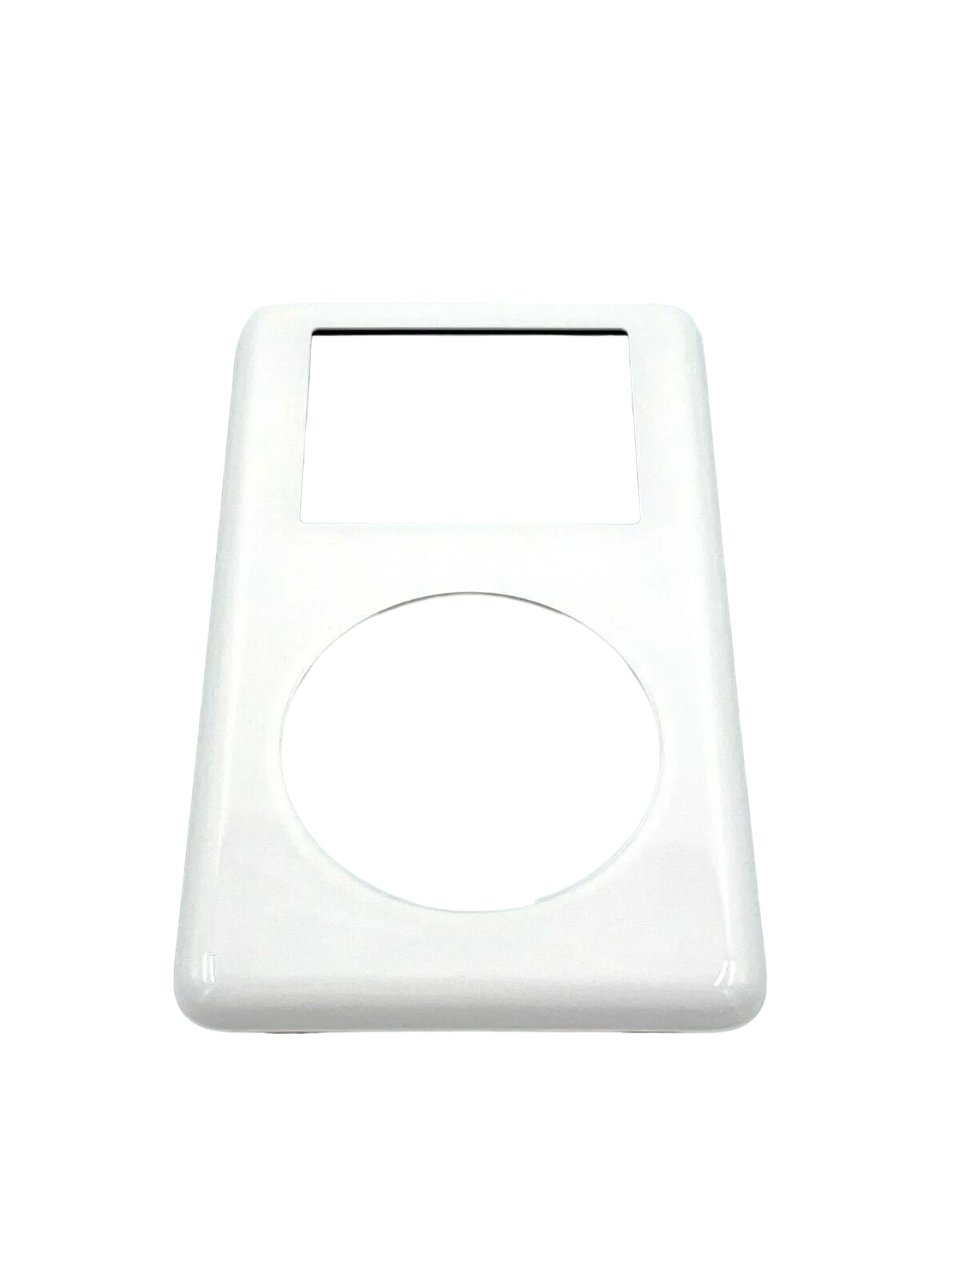 Replacement Face Plate For Apple iPod Classic 4th Gen Photo A1099 White